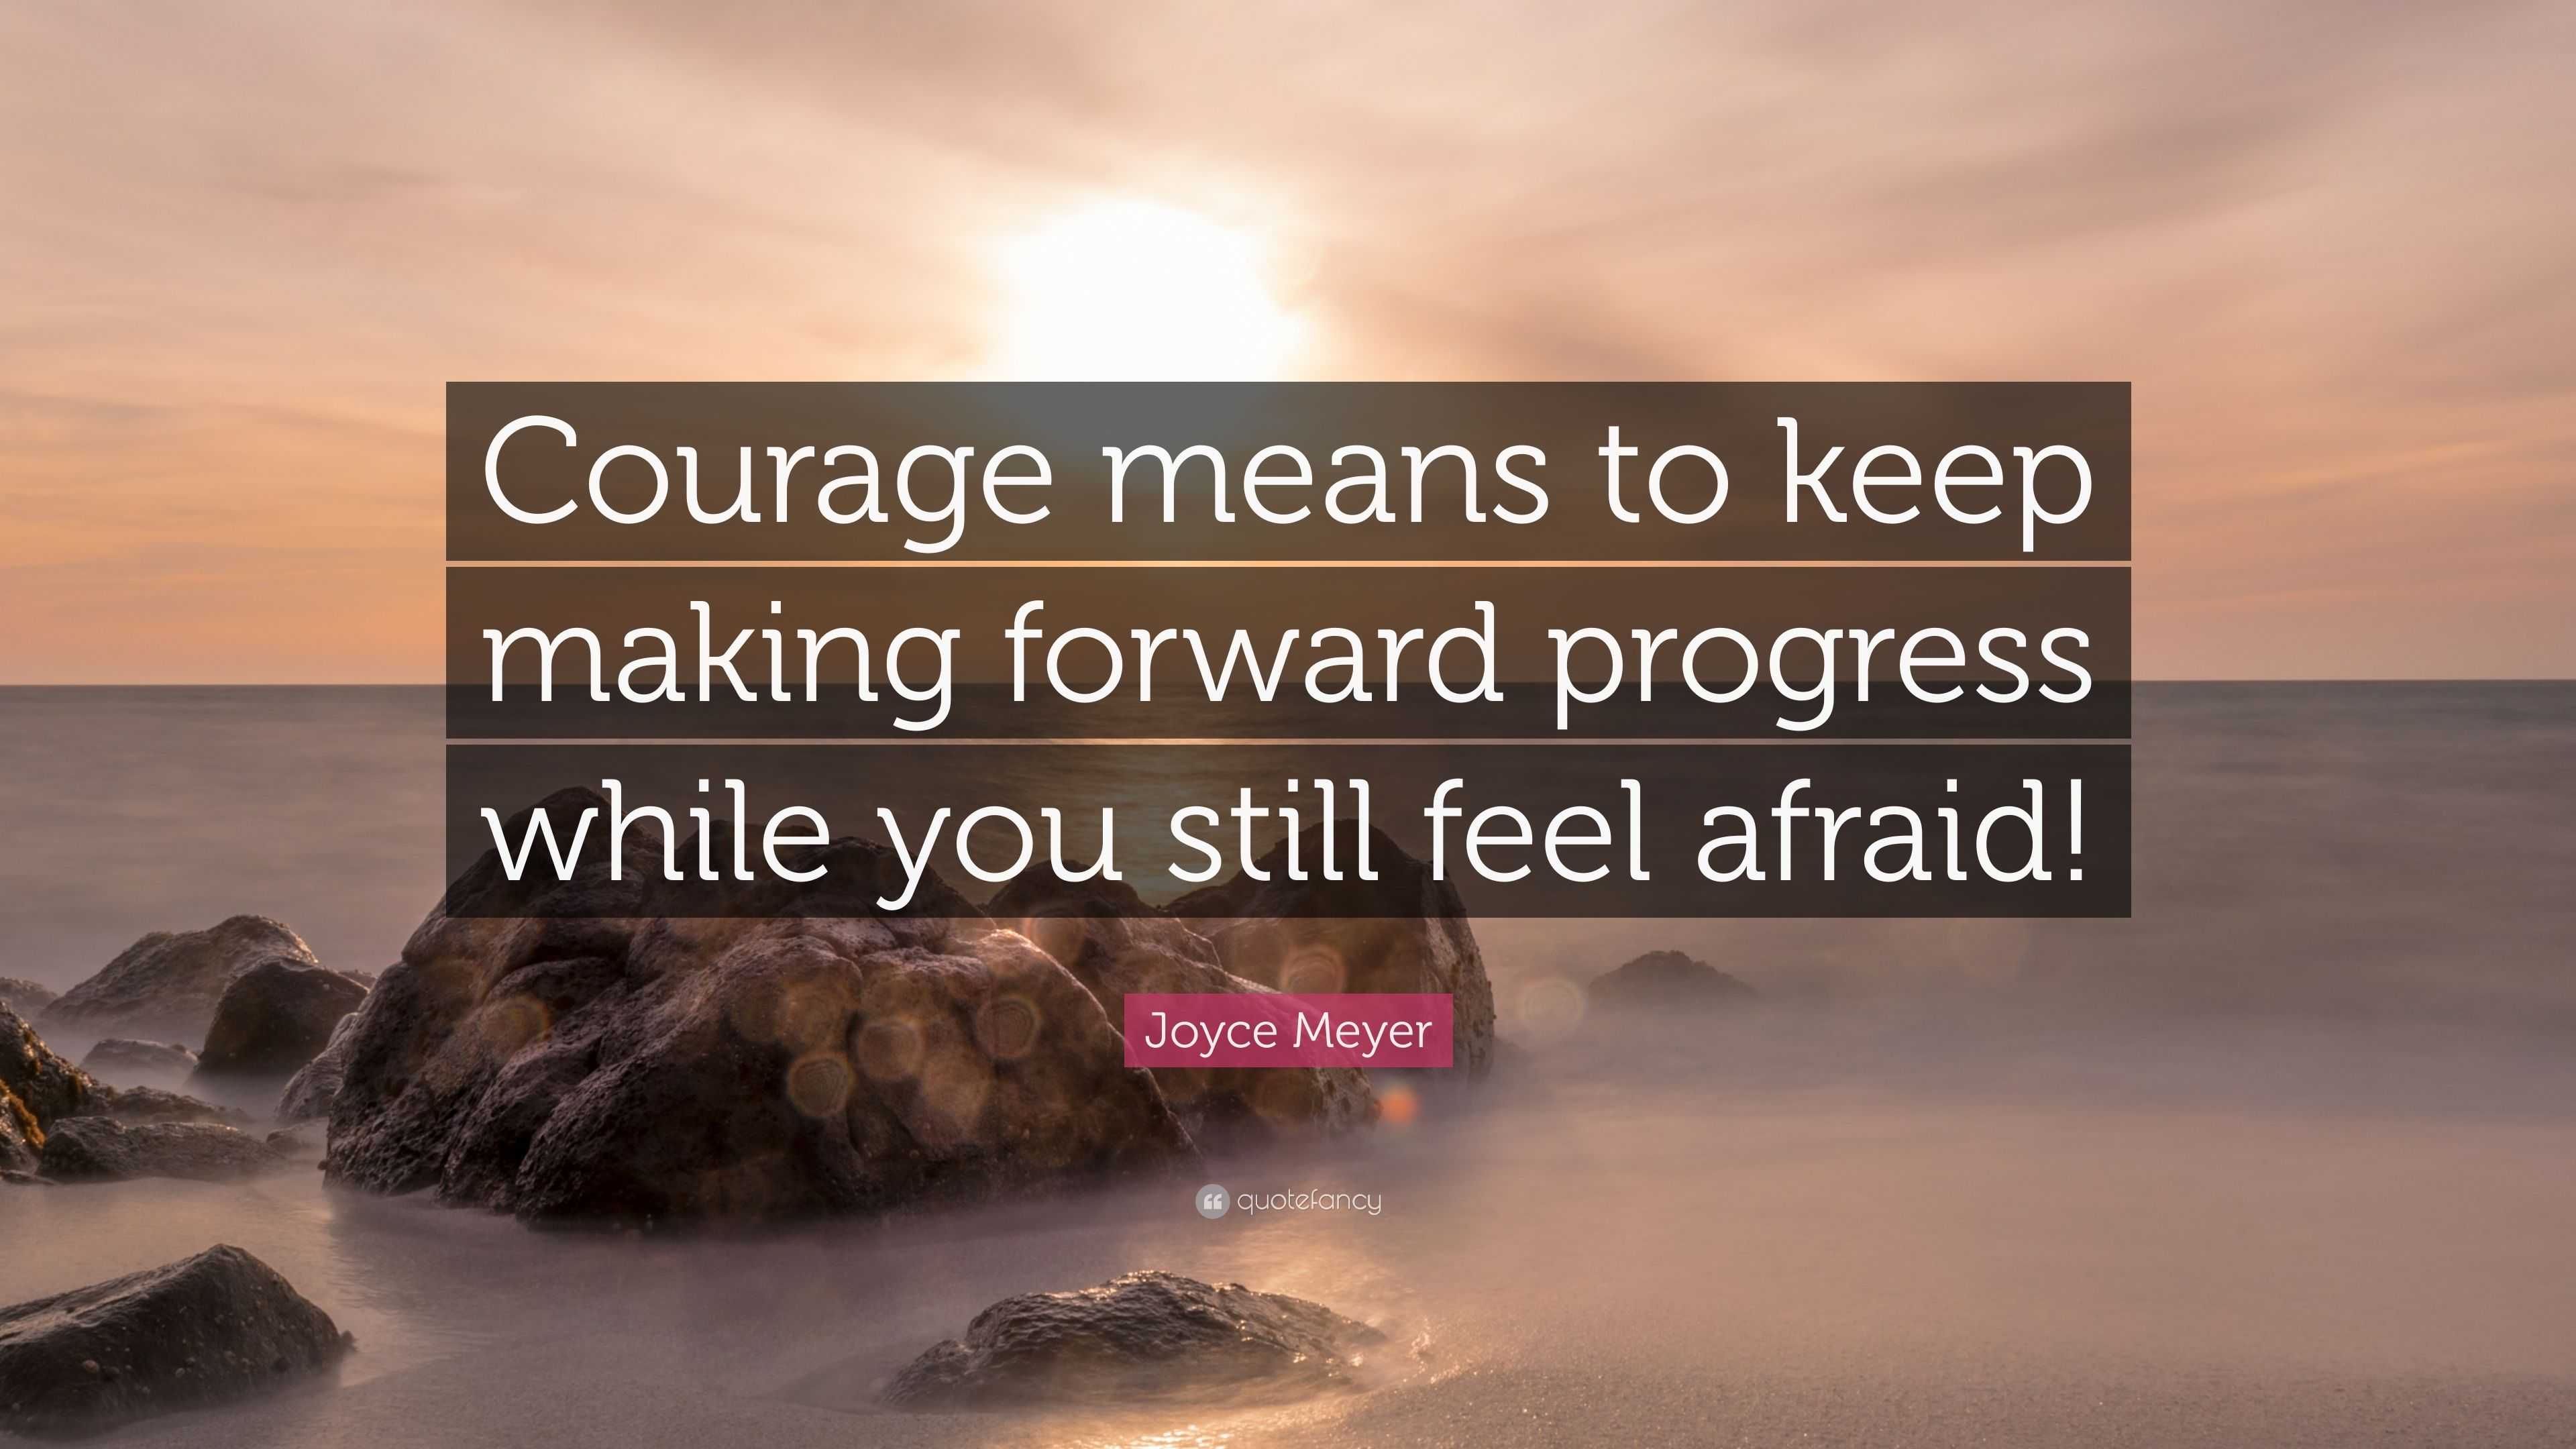 Joyce Meyer Quote: “Courage means to keep making forward progress while ...